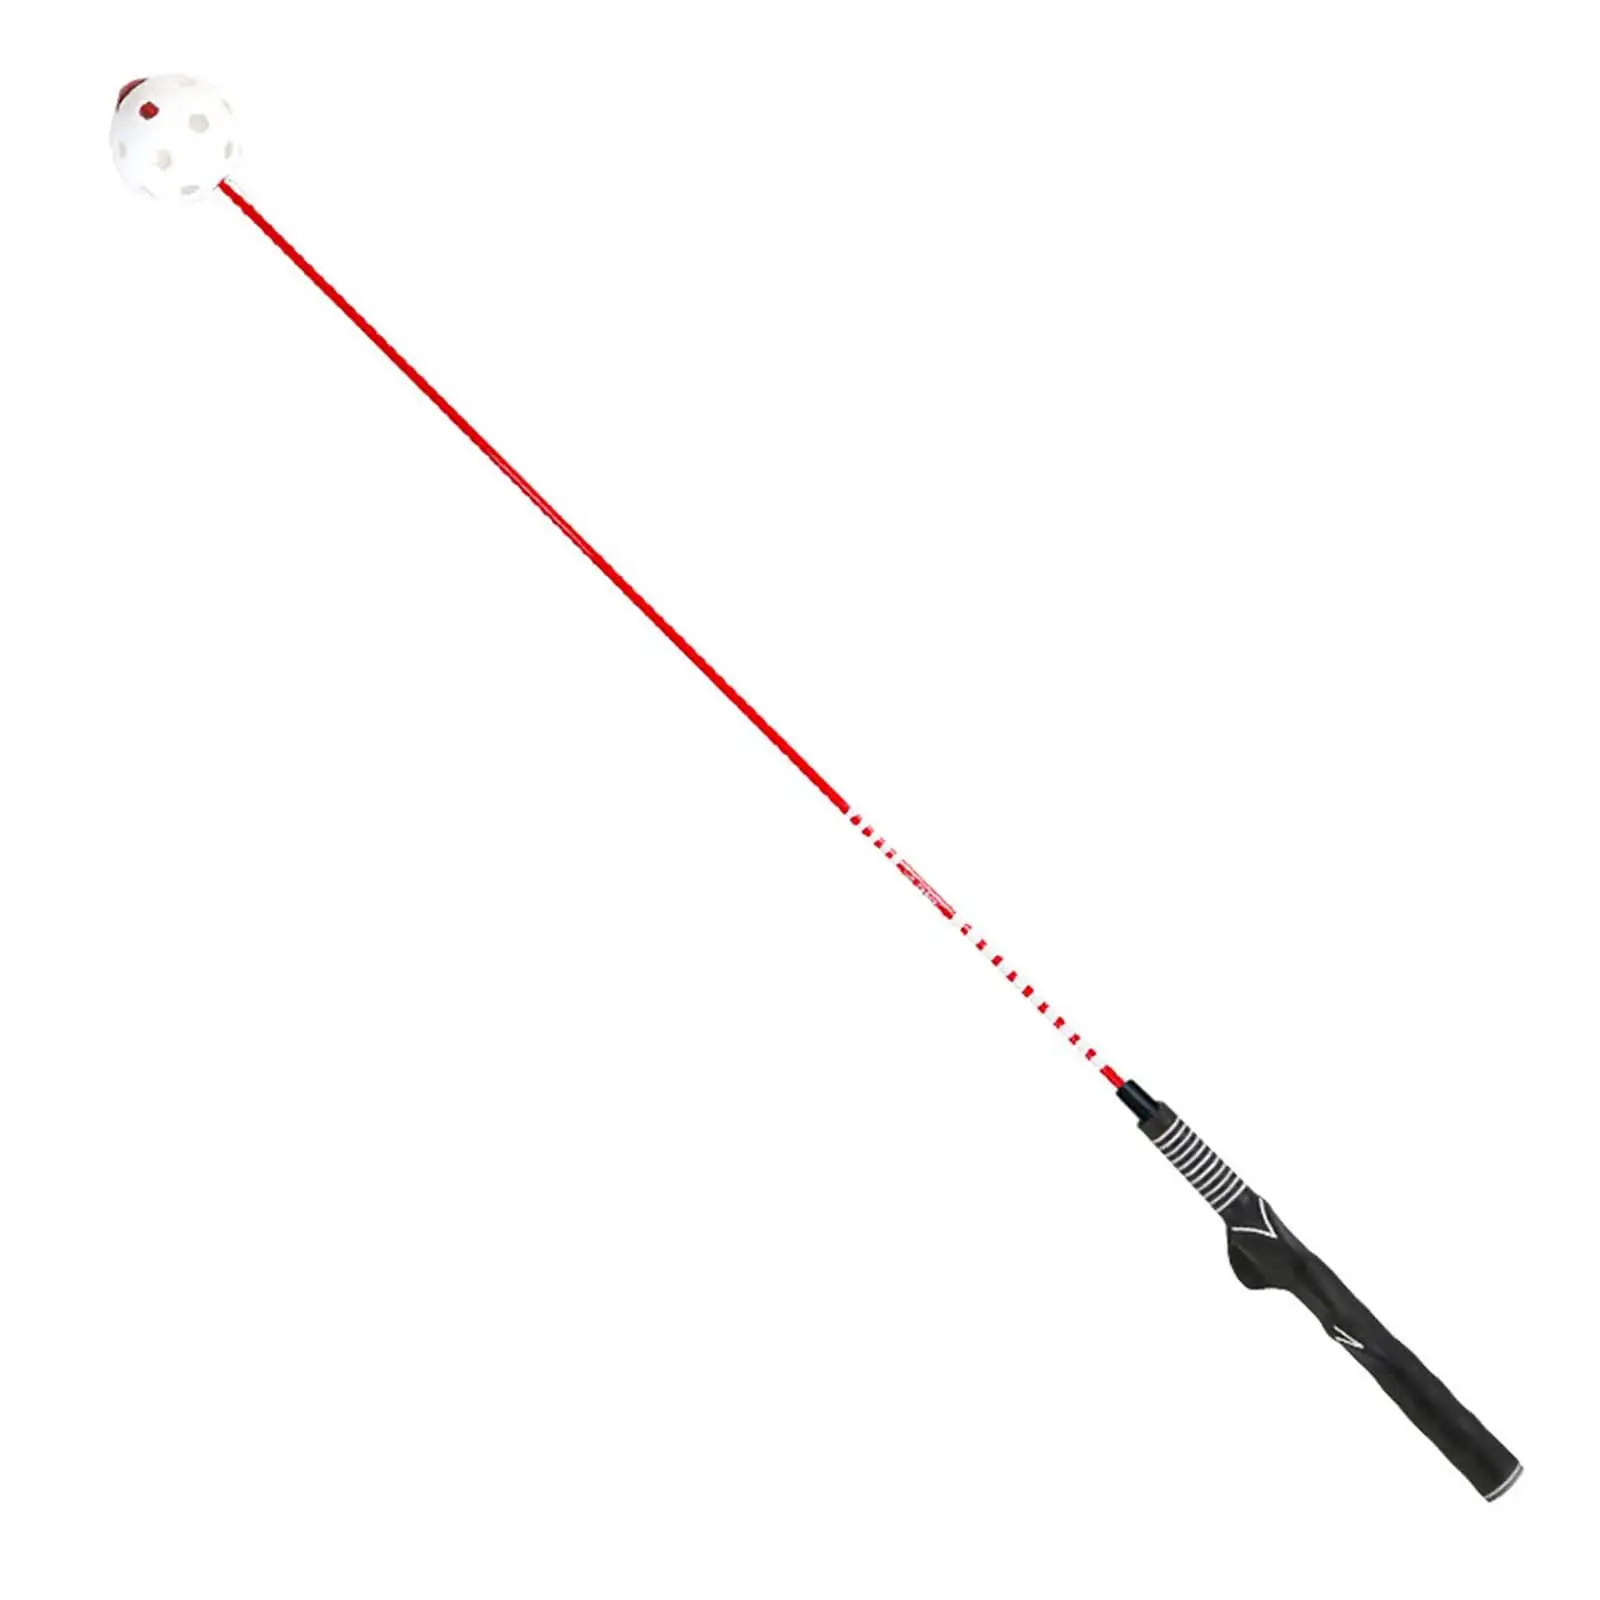 Golf Swing Trainer, Golf Club Equipment Flexible Rod Portable Improving Gesture Golf Training Aid for Practice Exercise